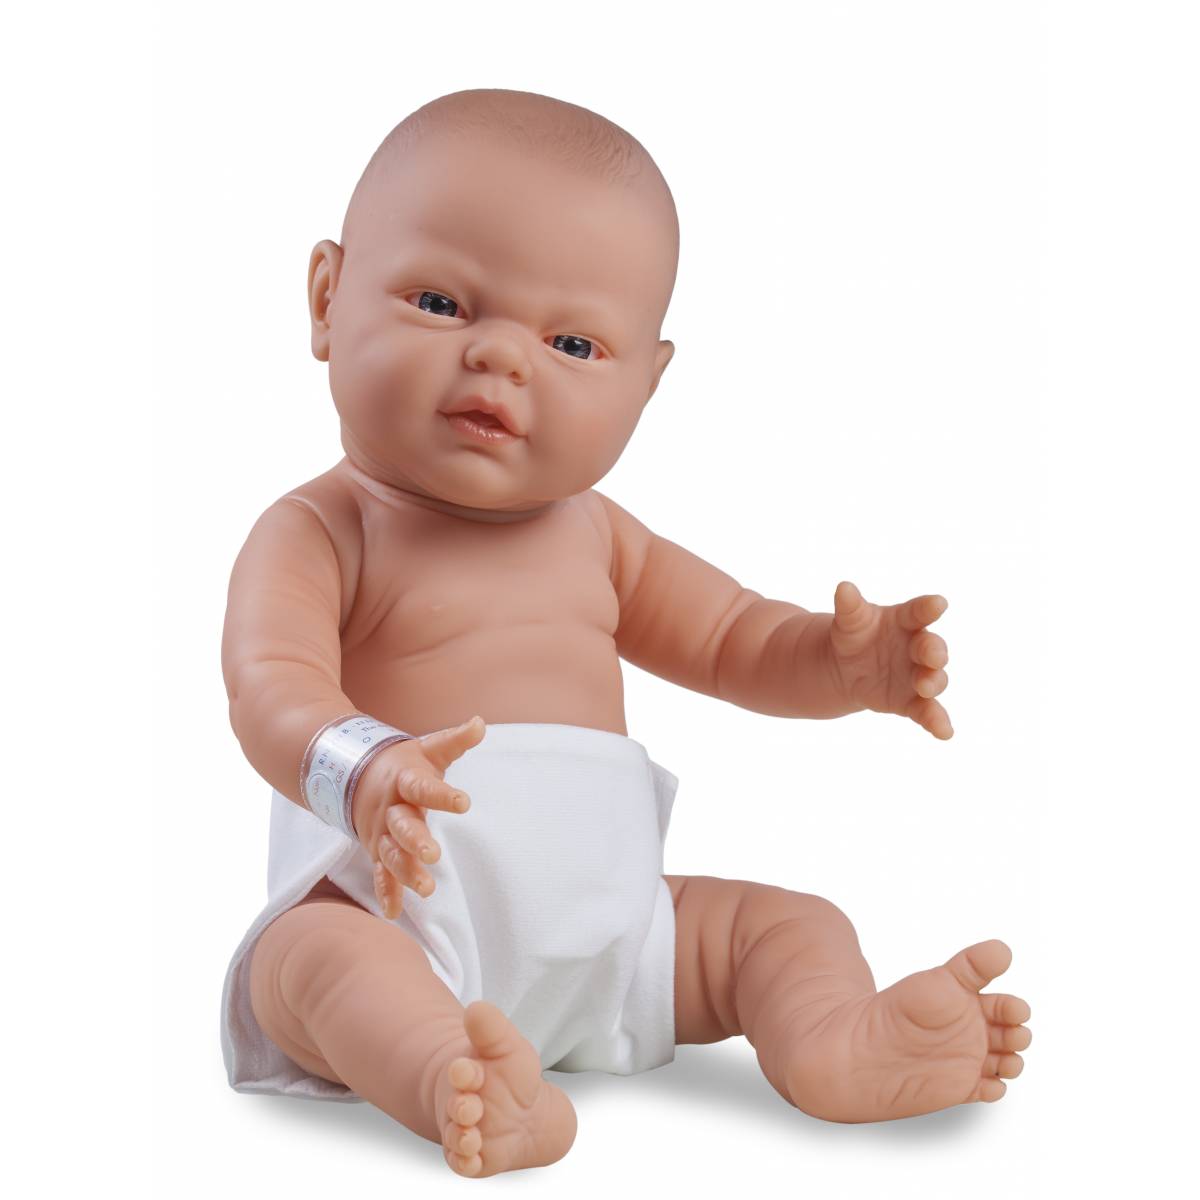 Male Baby Doll with Clothes